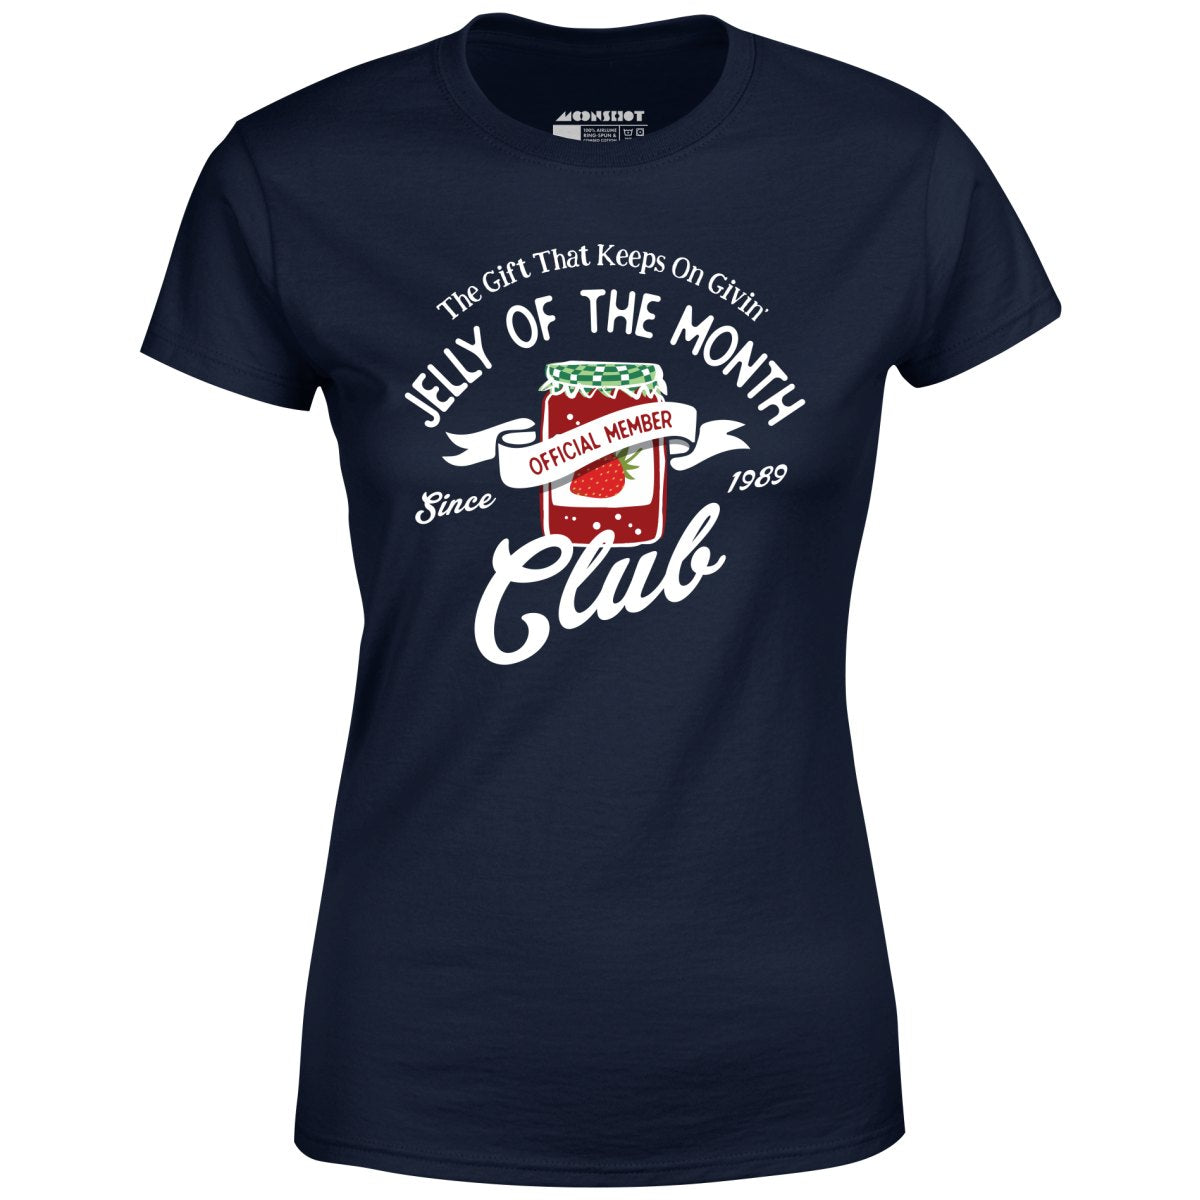 Jelly of the Month Club - Women's T-Shirt